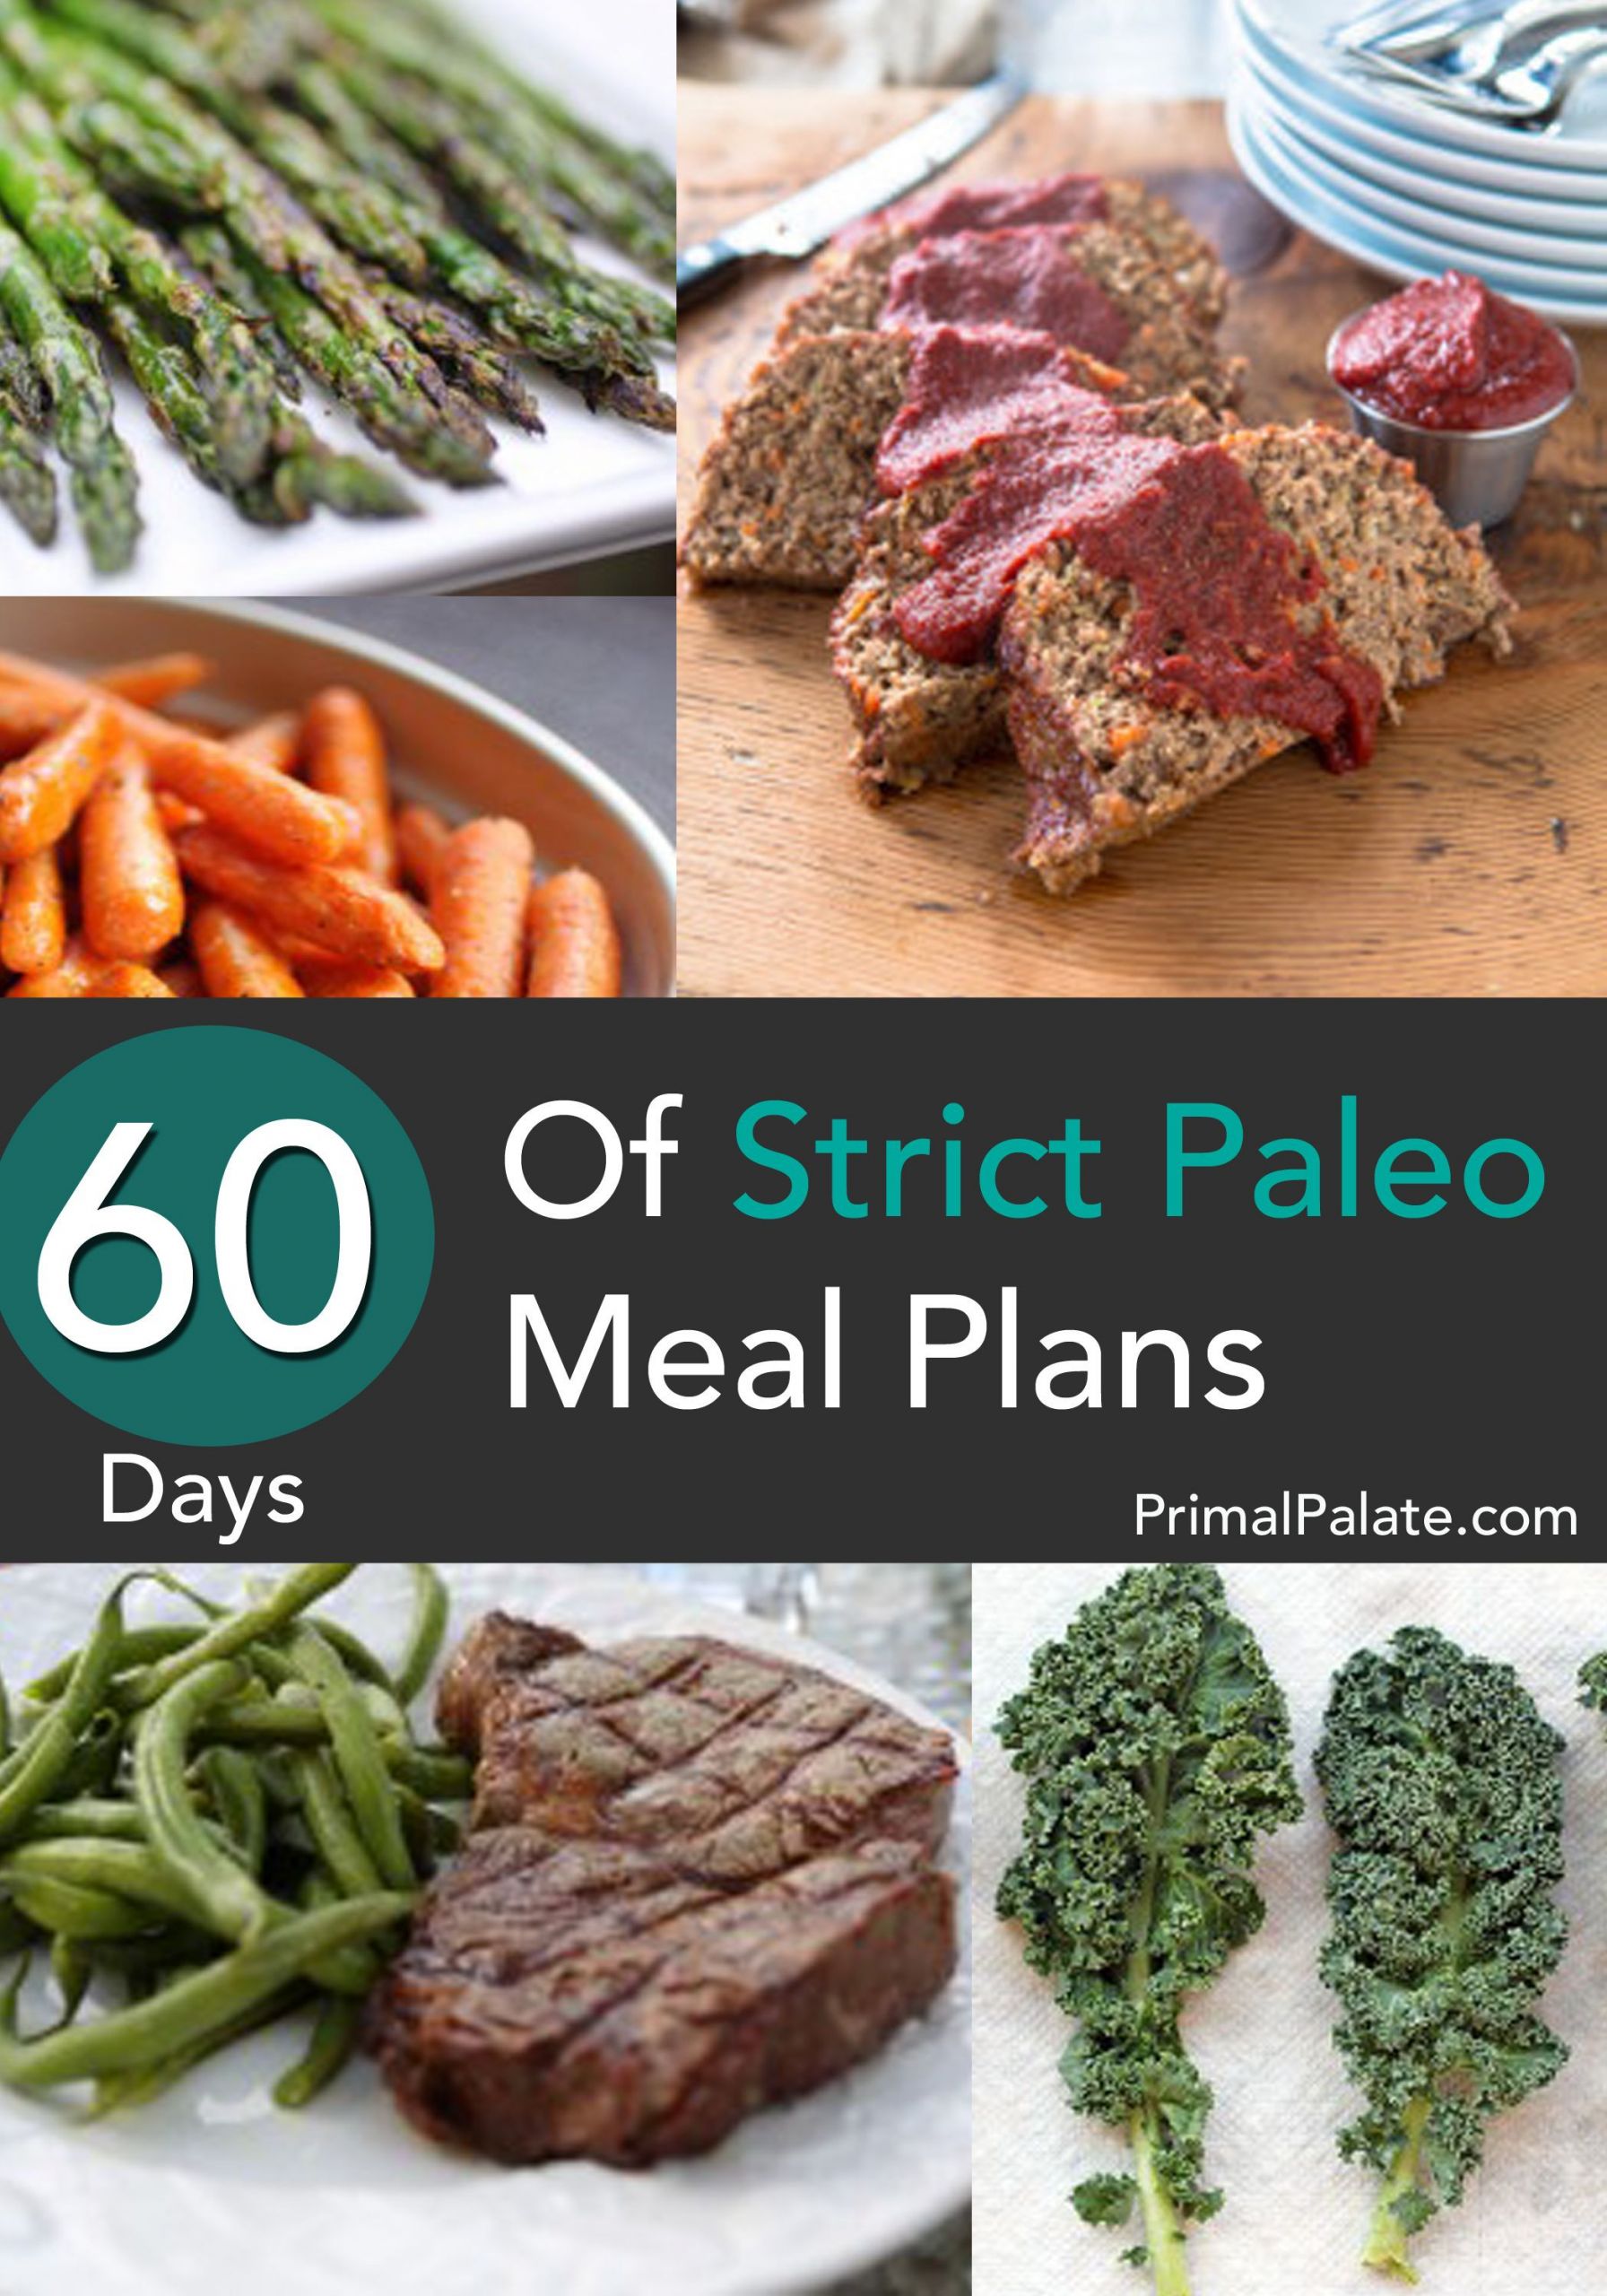 Strict Paleo Diet
 A strict clean 60 day meal plan for the Paleo Diet